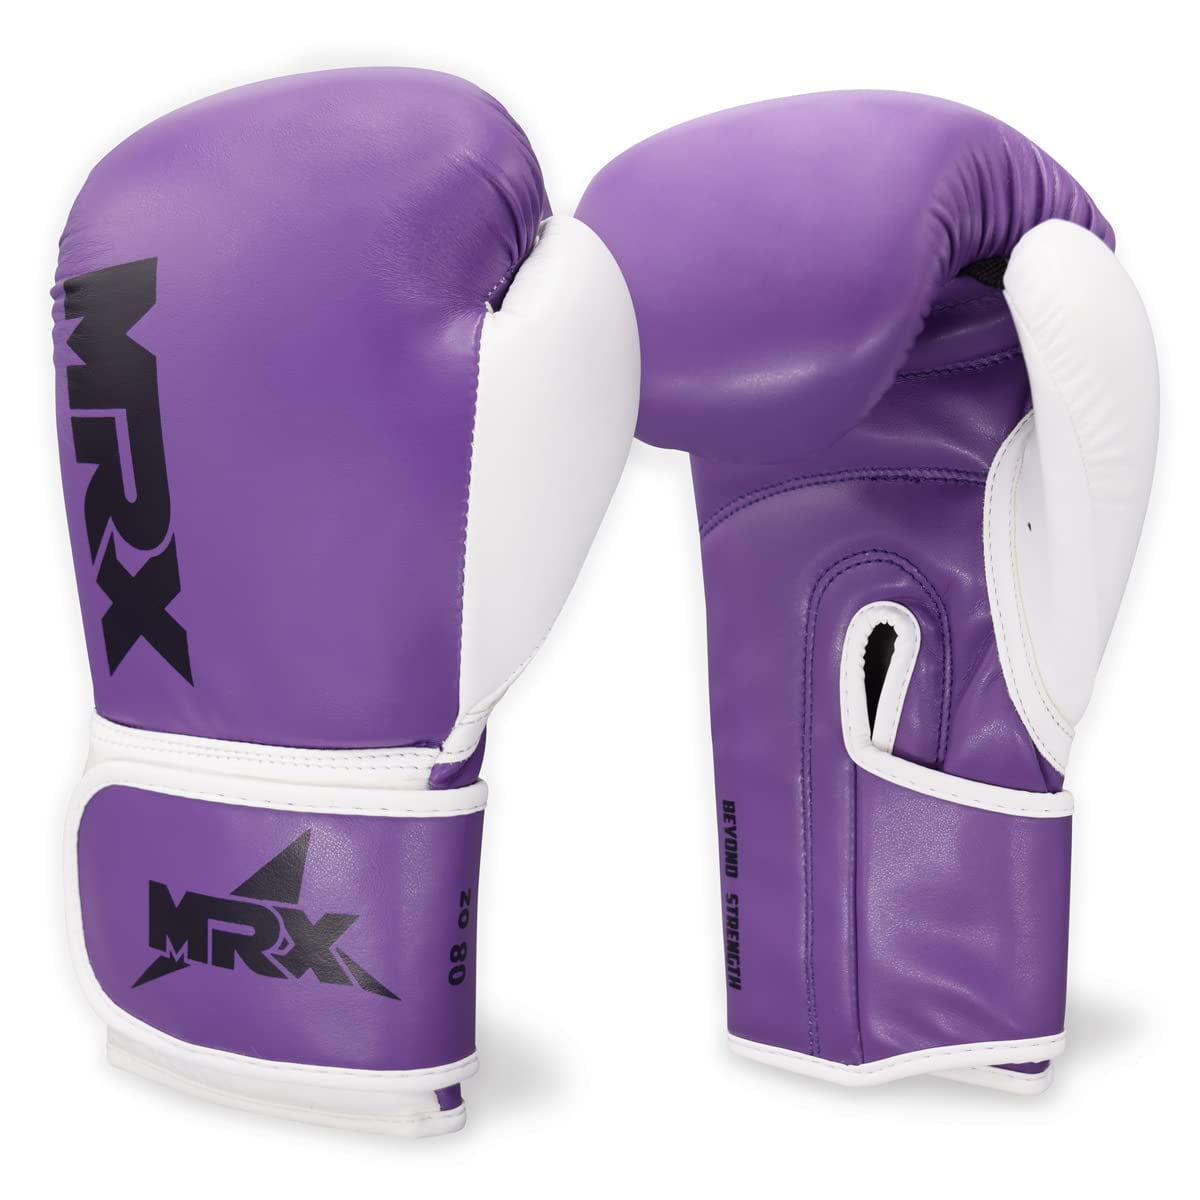 MMA Boxing Gloves Grappling Punching Bag Training Kickboxing Fight Sparring 